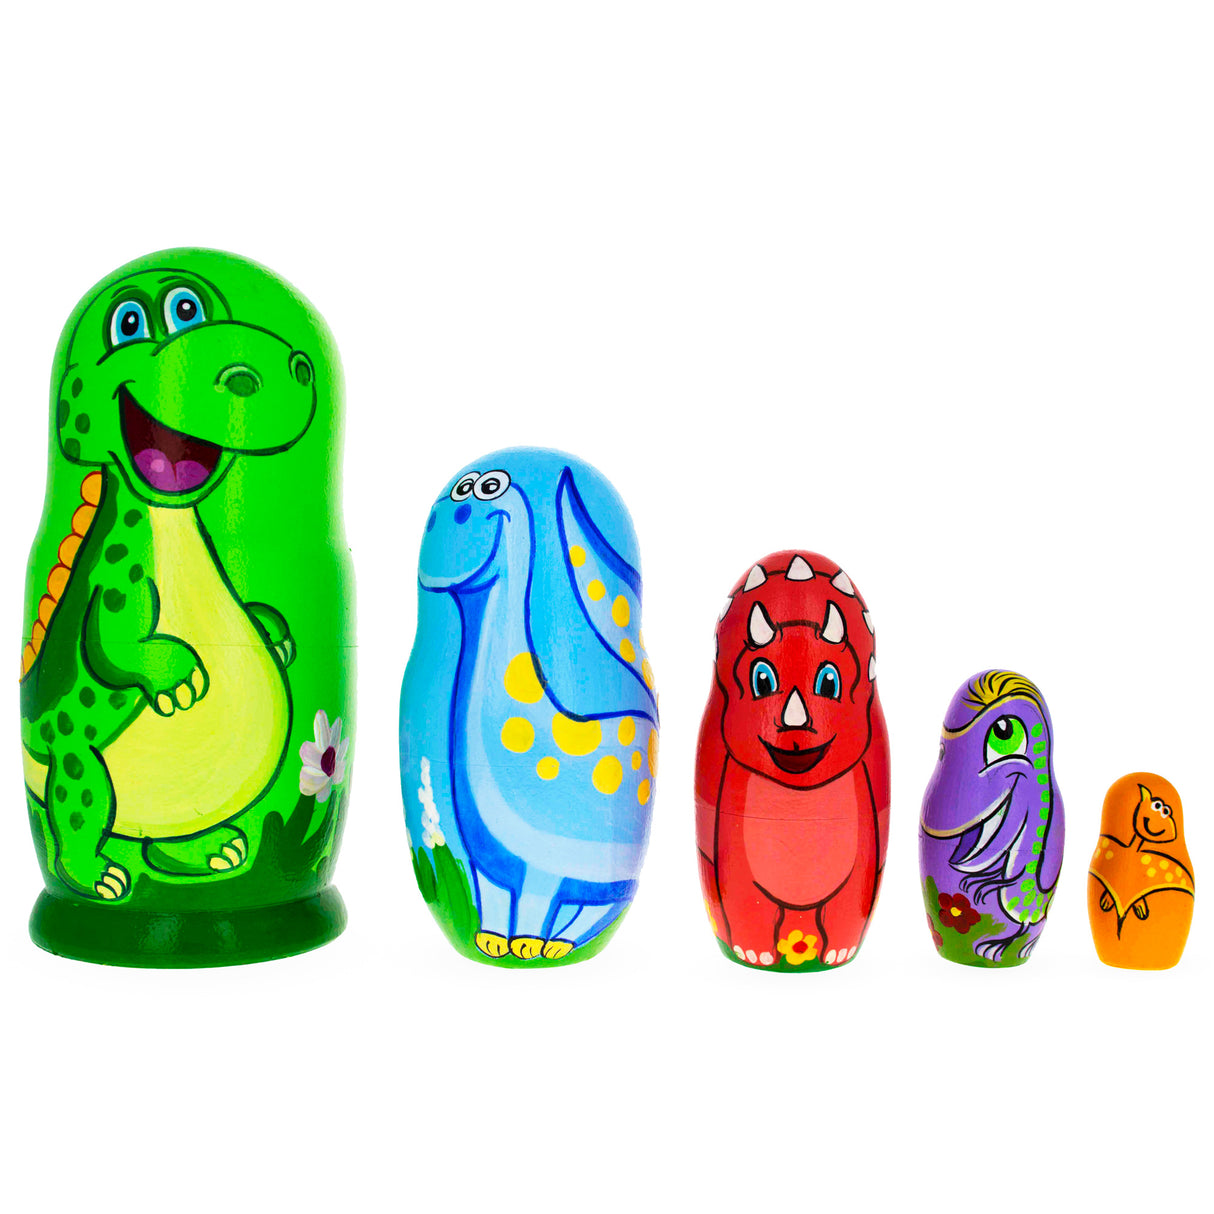 Wood Set of 5 Dinosaurs Wooden Nesting Dolls 6 Inches in Multi color